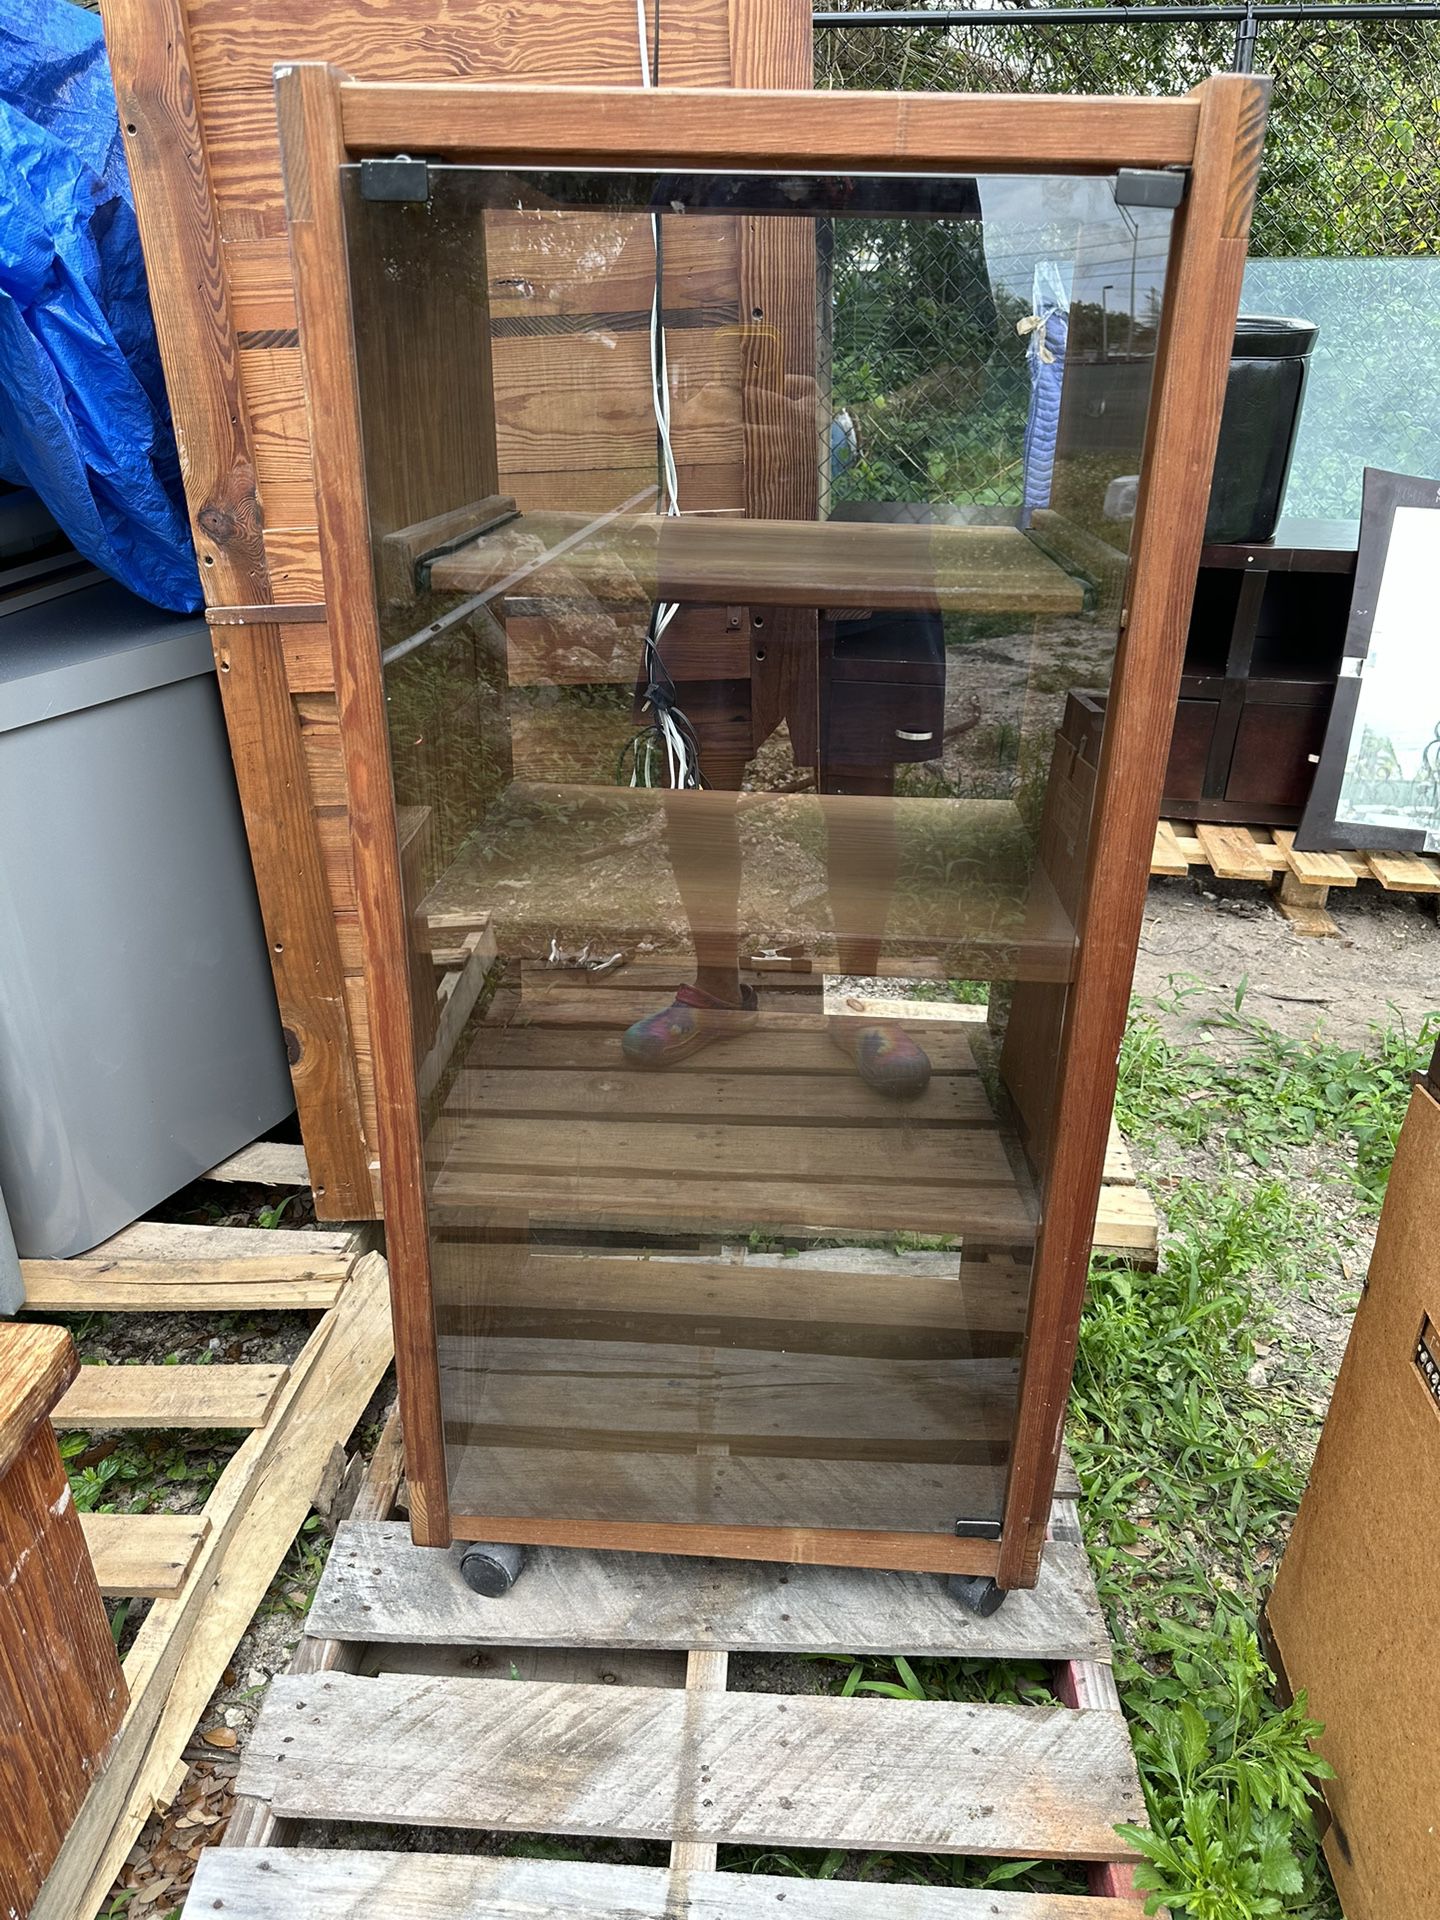 Wood Display Cabinet With 4 Shelves And Glass Door In Front, On Wheels